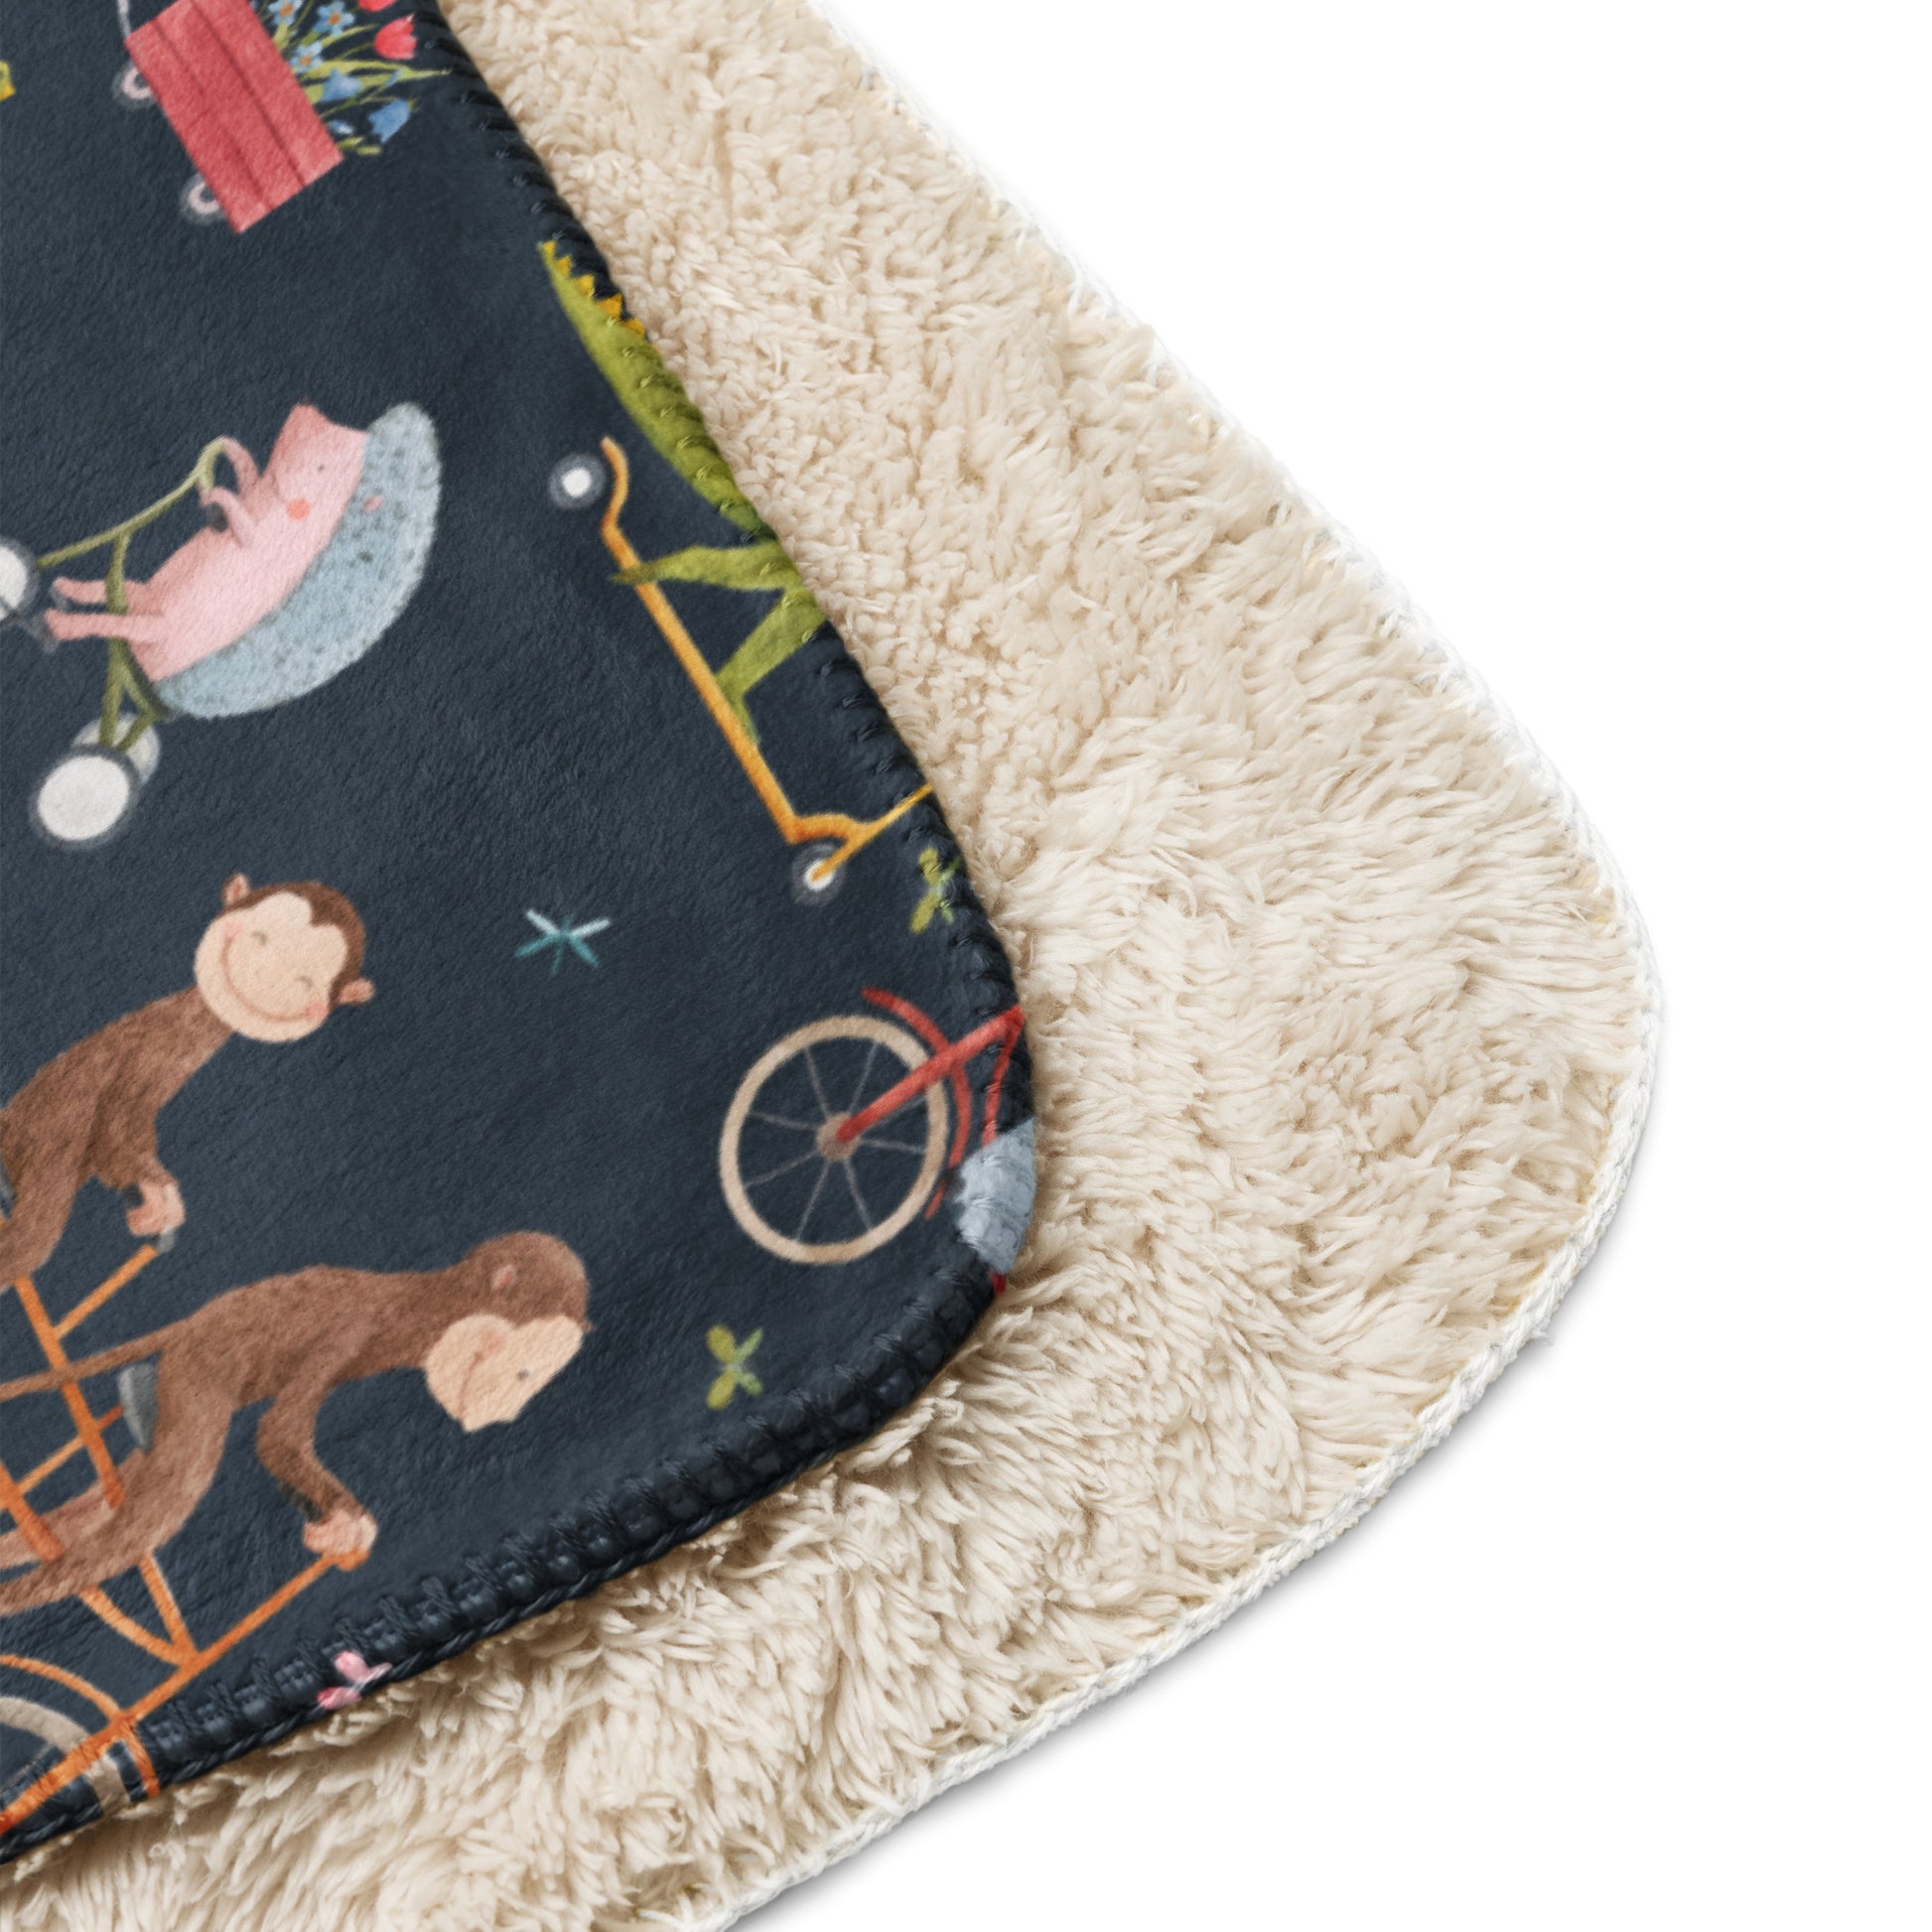 Circus Traffic Jam All Over Printed Sherpa Baby/Kids blanket CedarHill Country Market